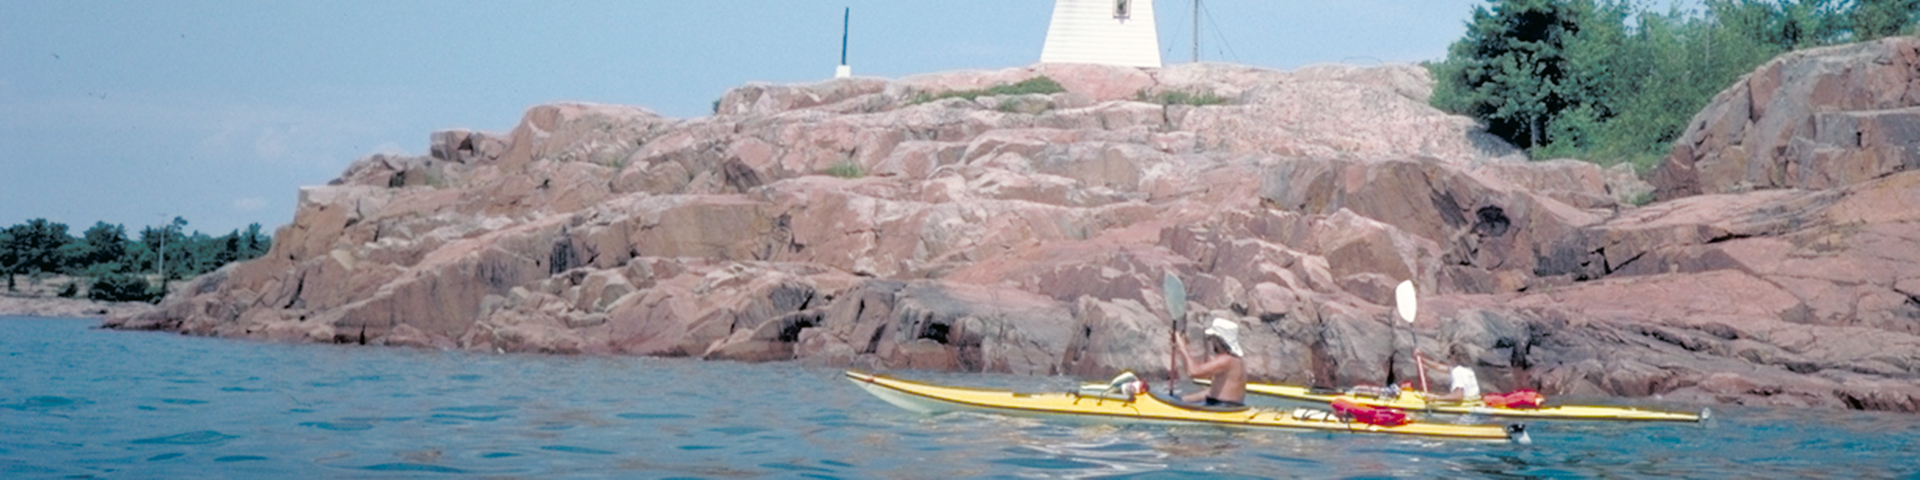 Georgian Bay - North Channel Sea Kayaking Trip by Black Feather - Image 164